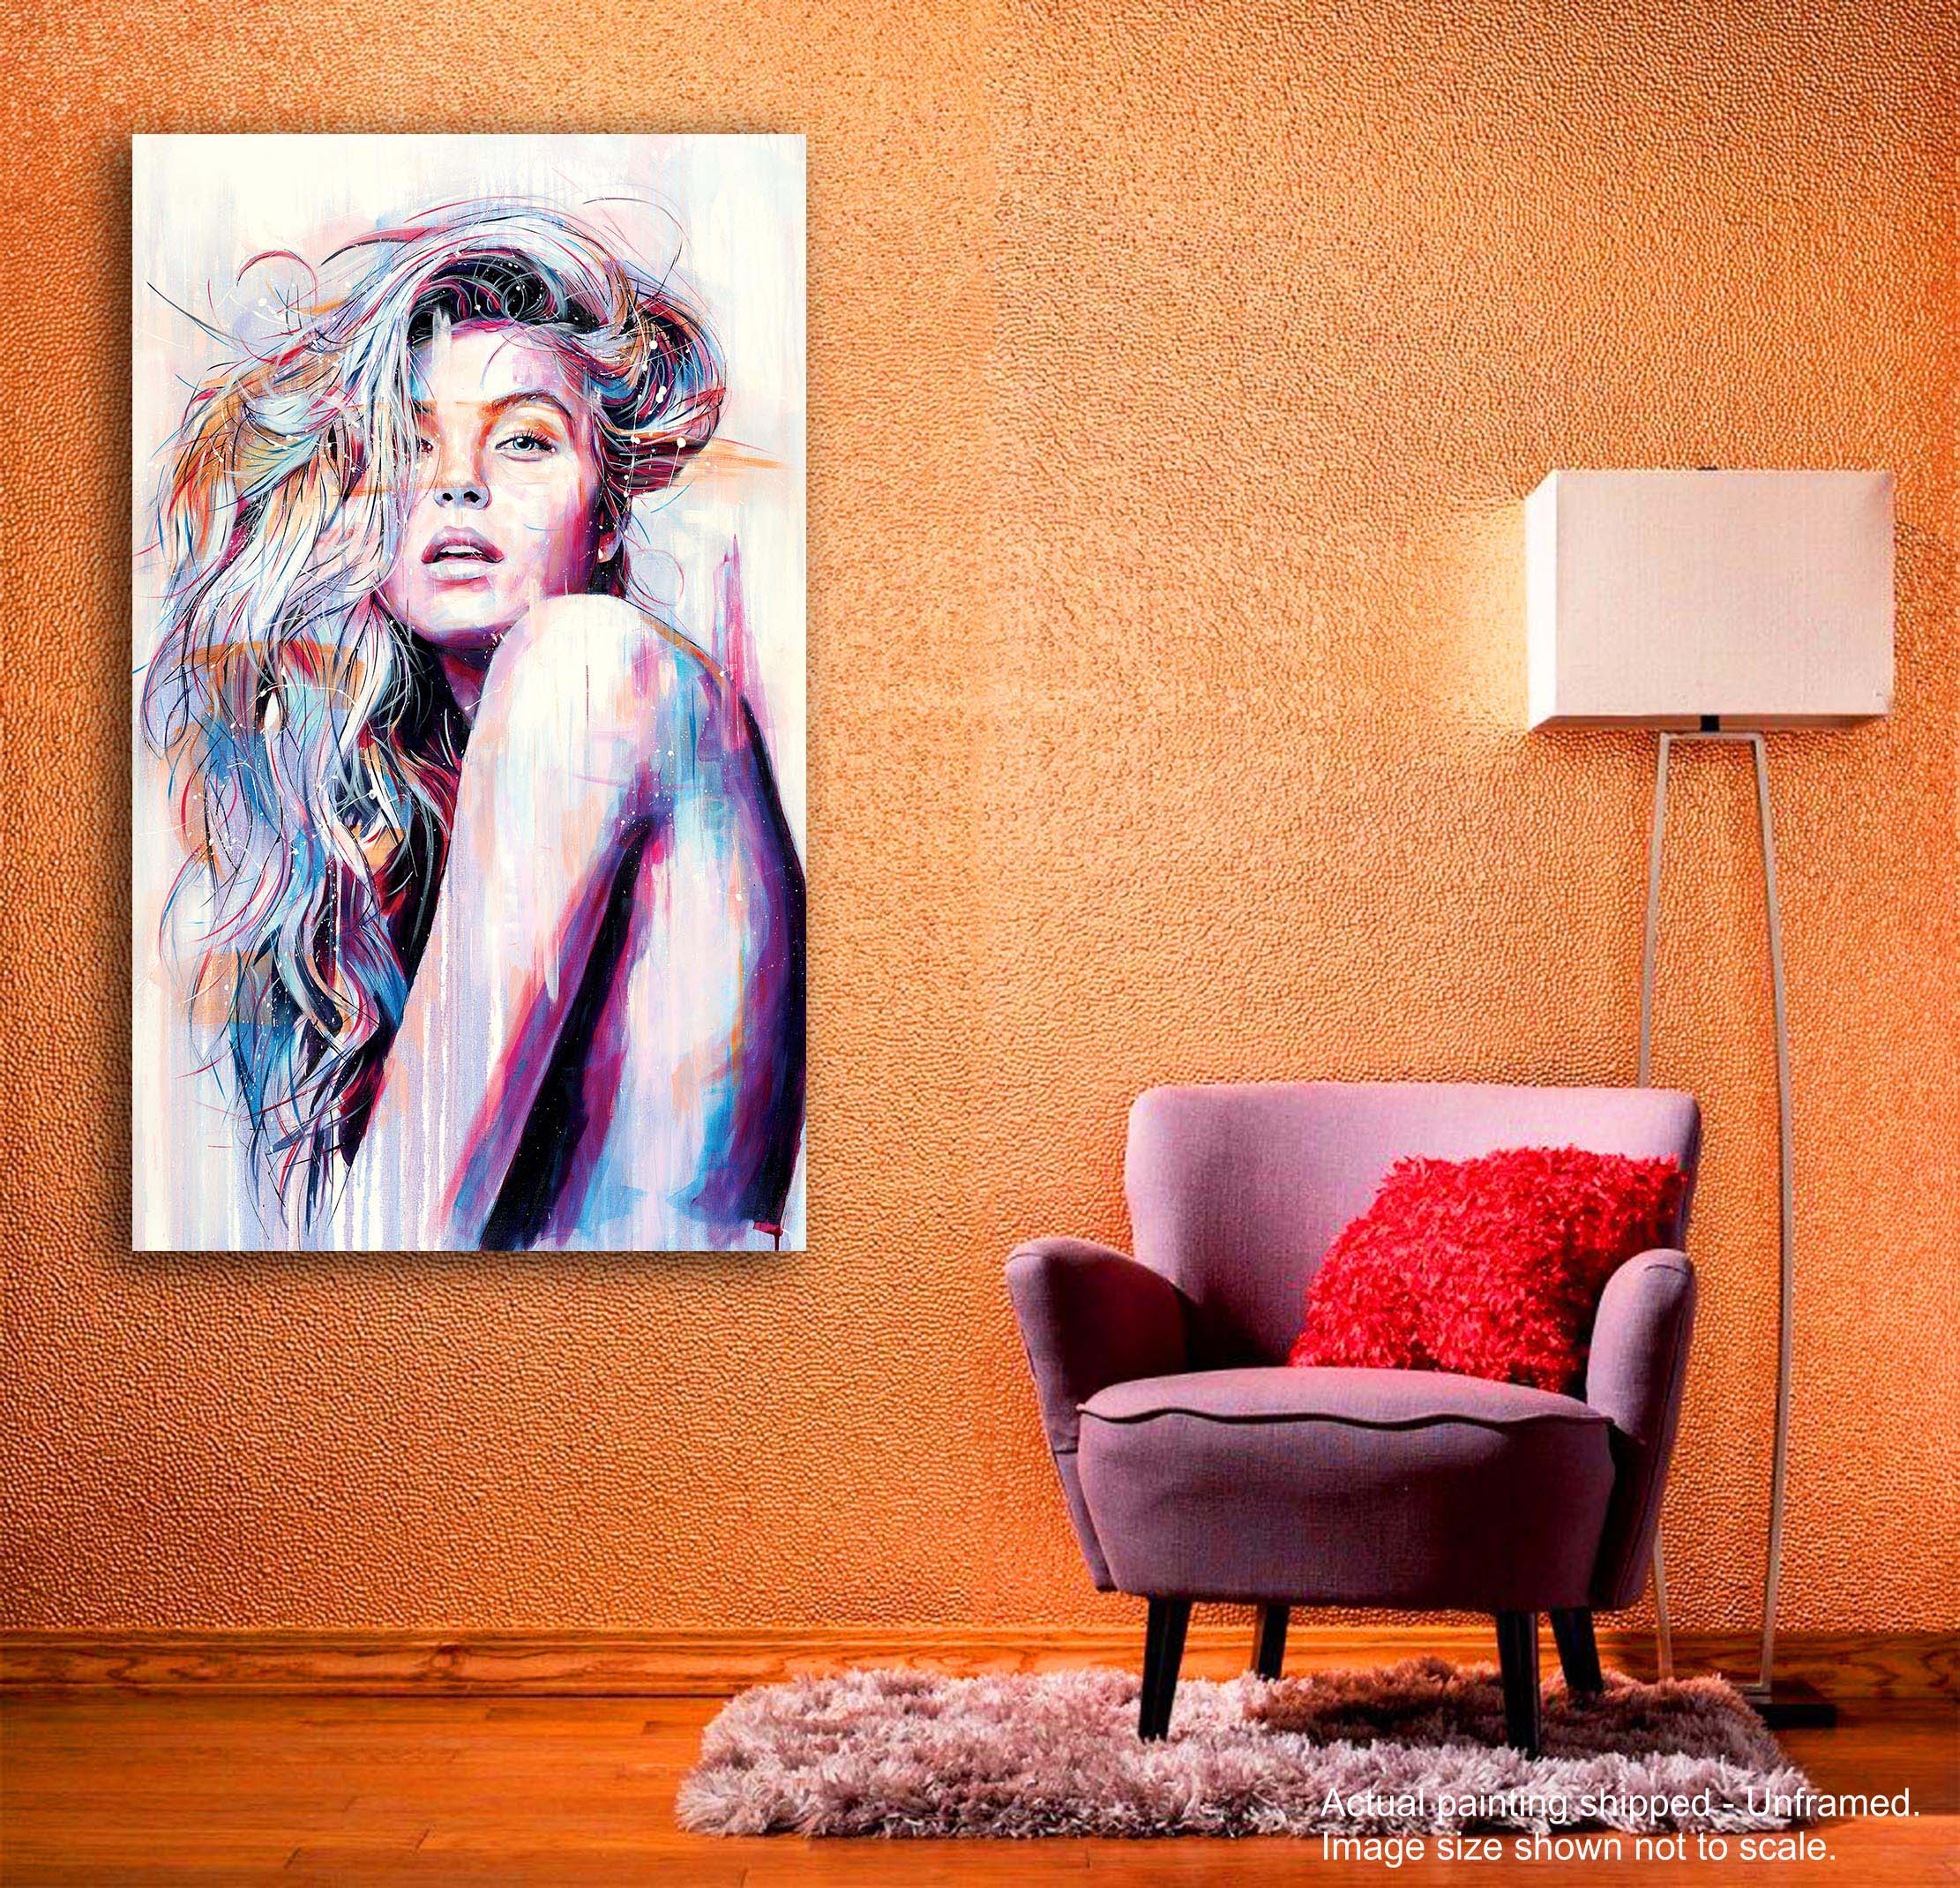 How She Looked in My Dreams - Unframed Canvas Painting